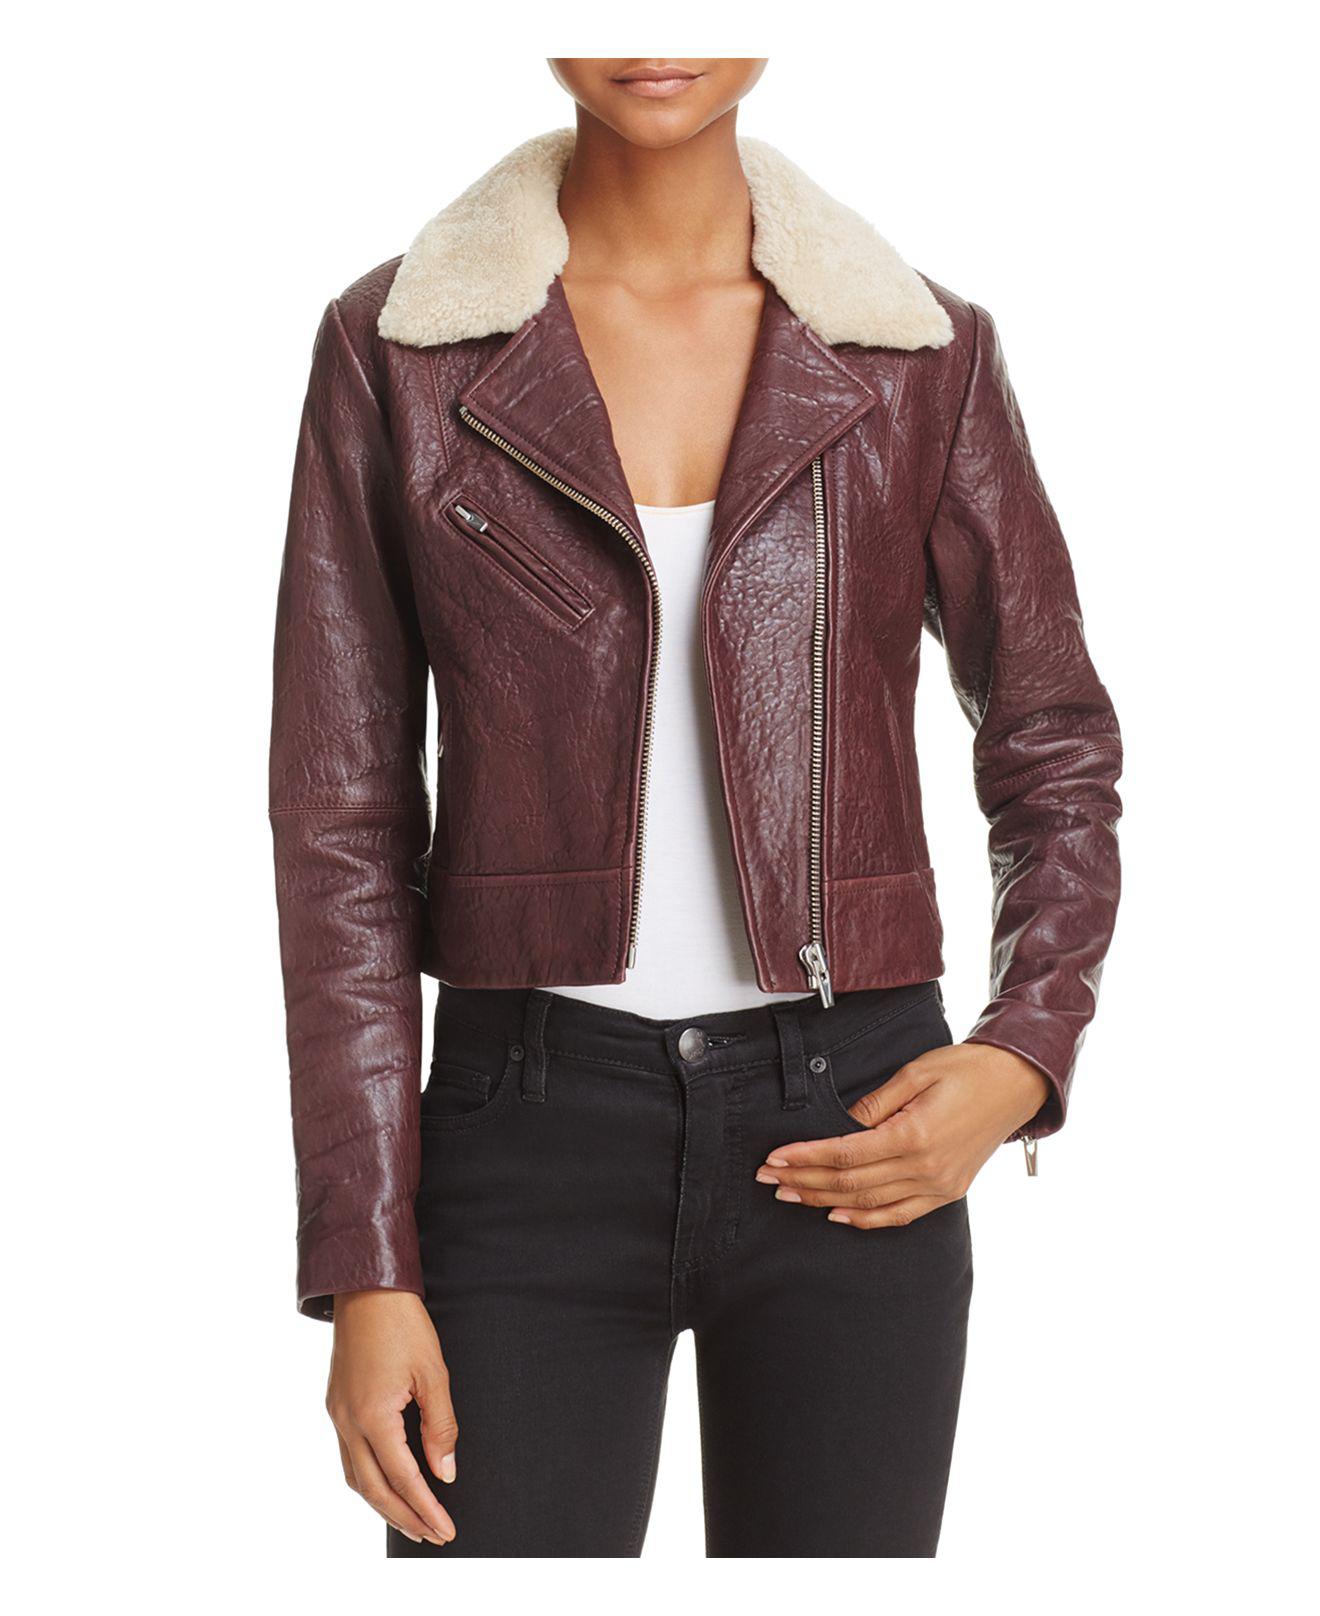 Lyst - Veda Nova Shearling-collar Leather Jacket in Red